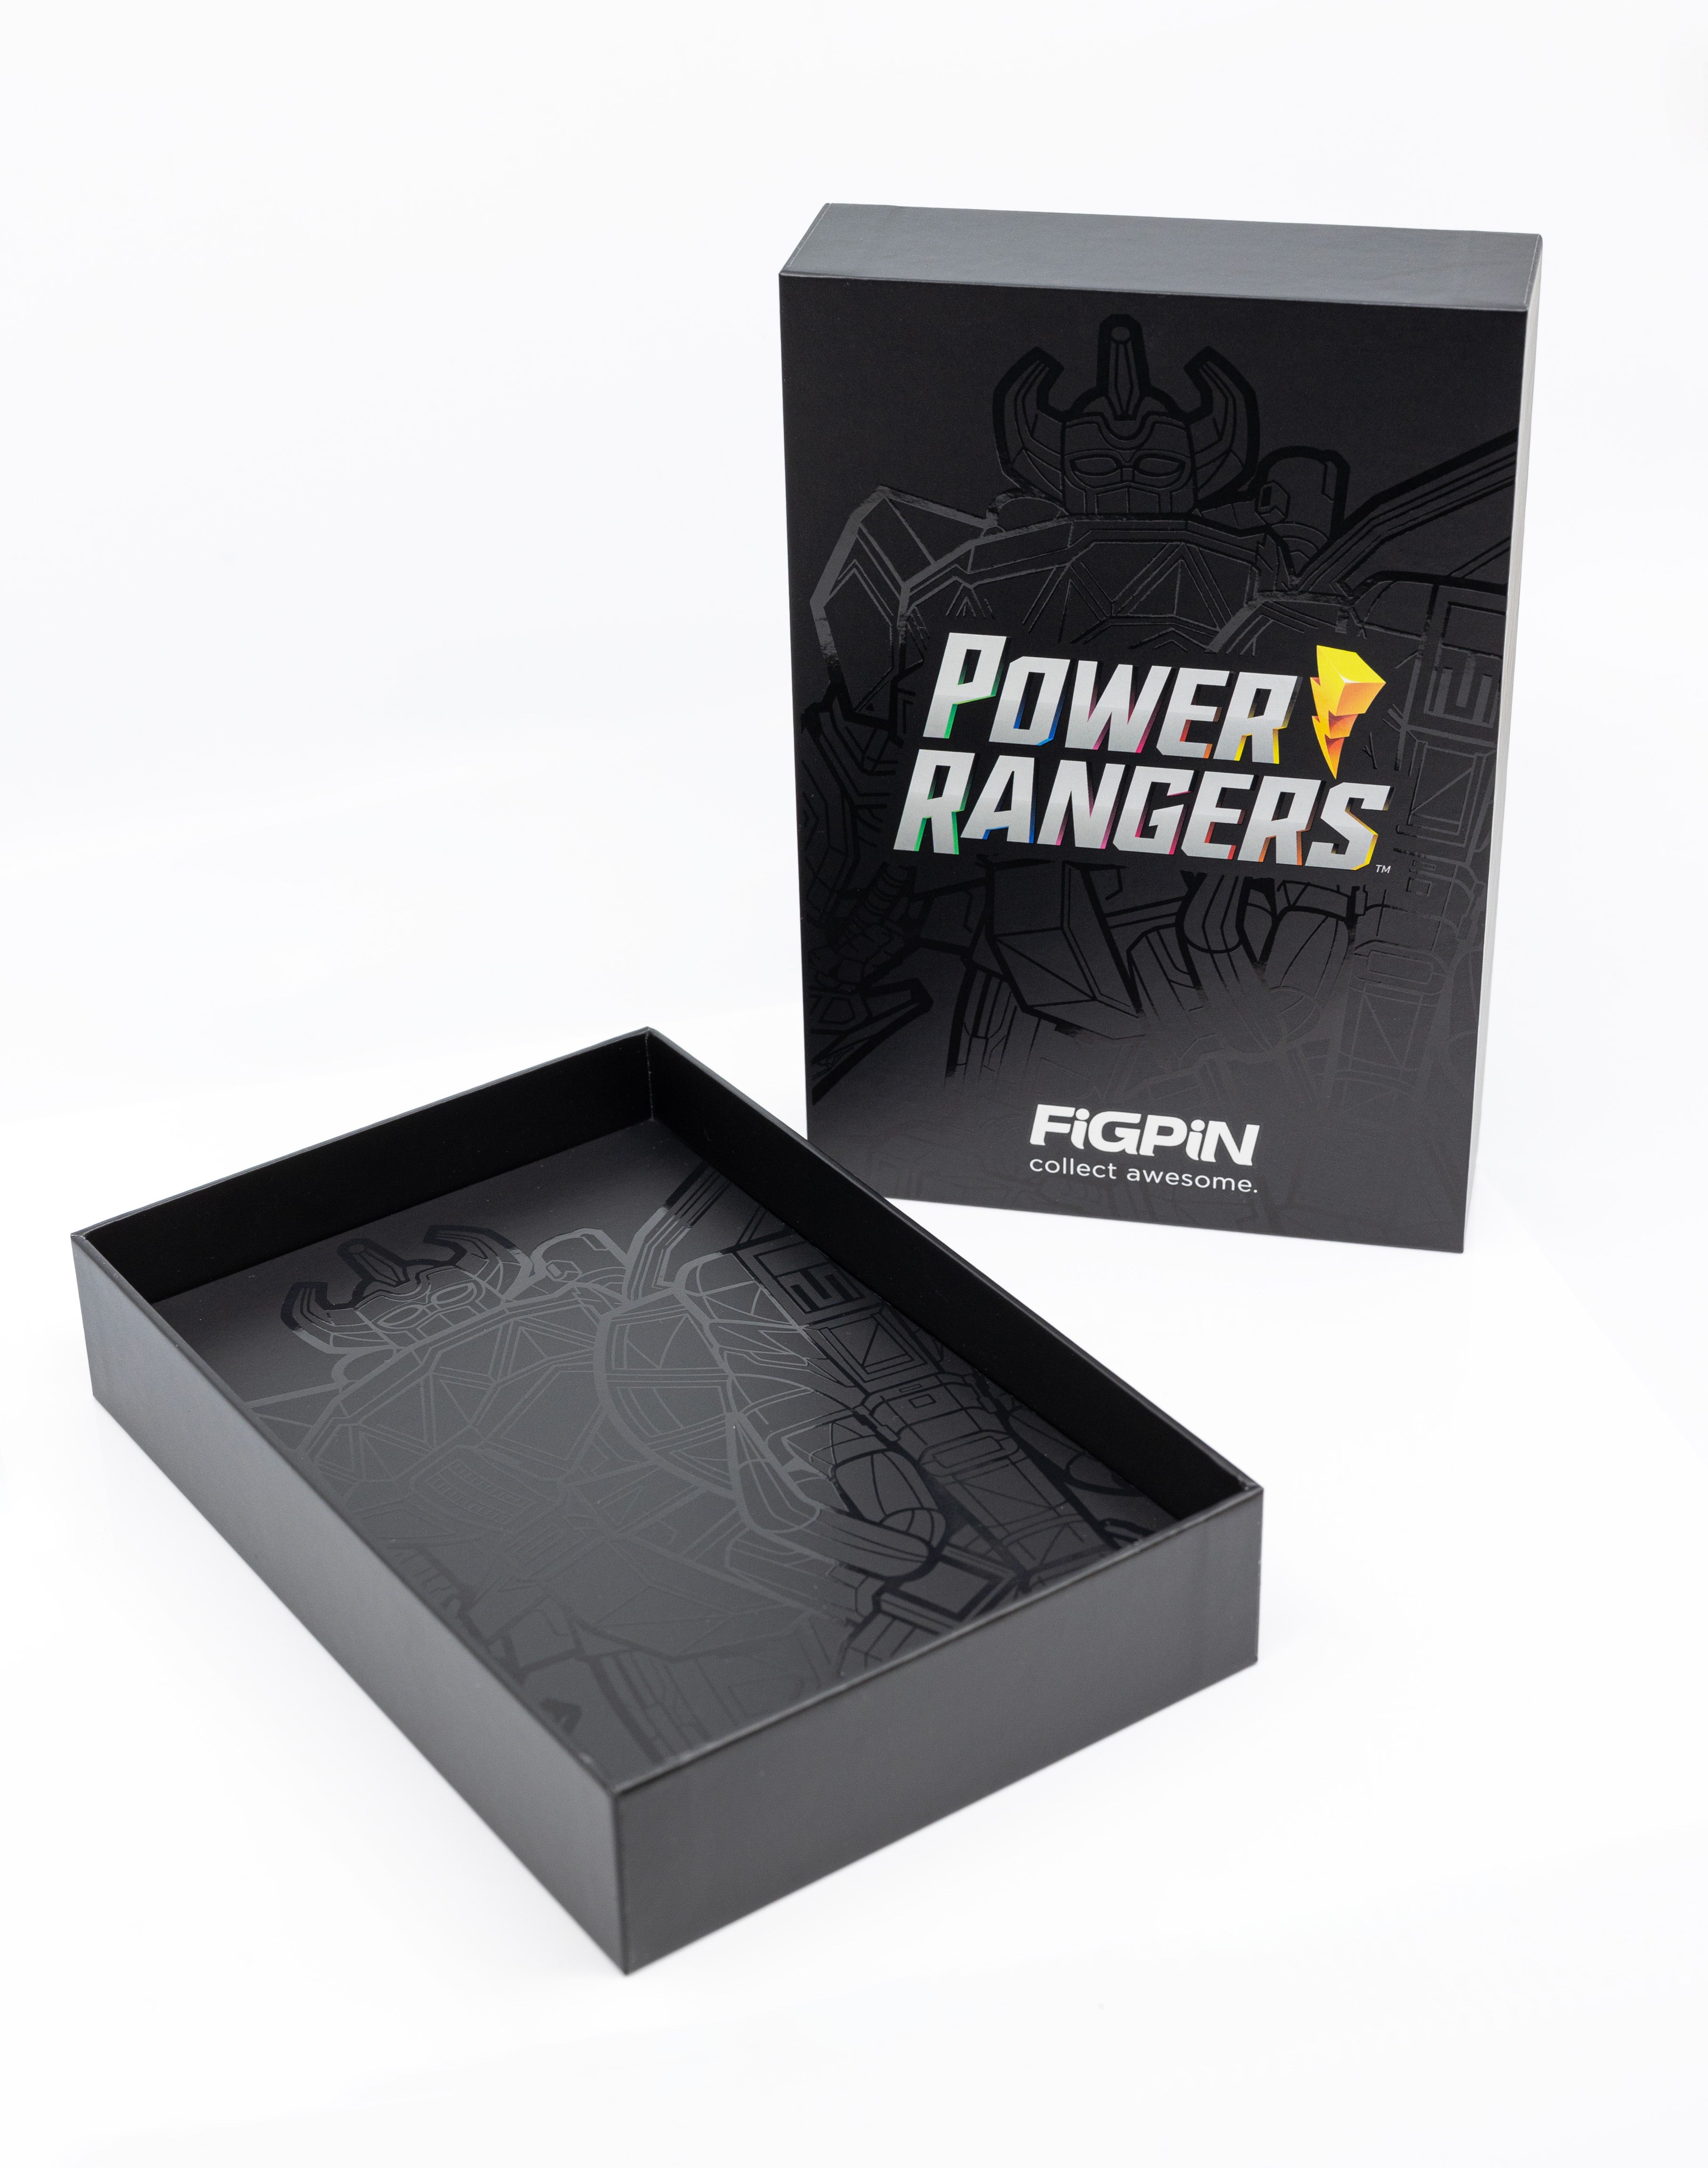 Power Rangers Megazord FiGPiN XL packaging with character art card of Megazord